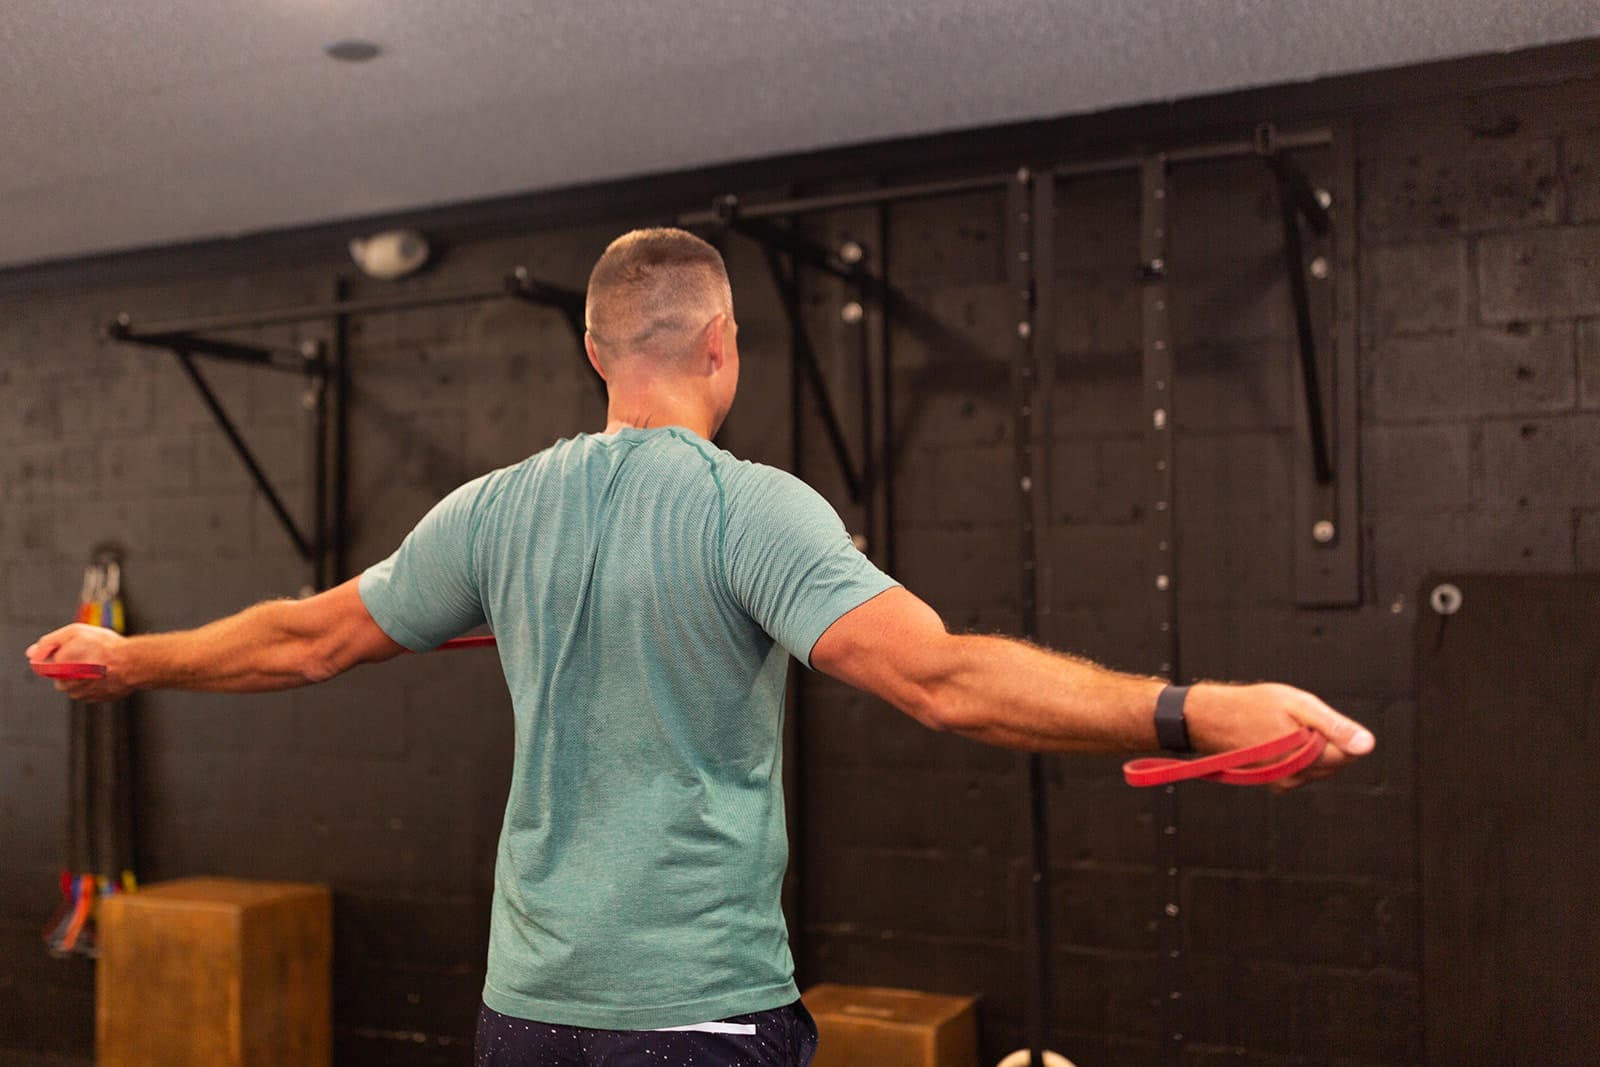 Man lifting weights during personal training session